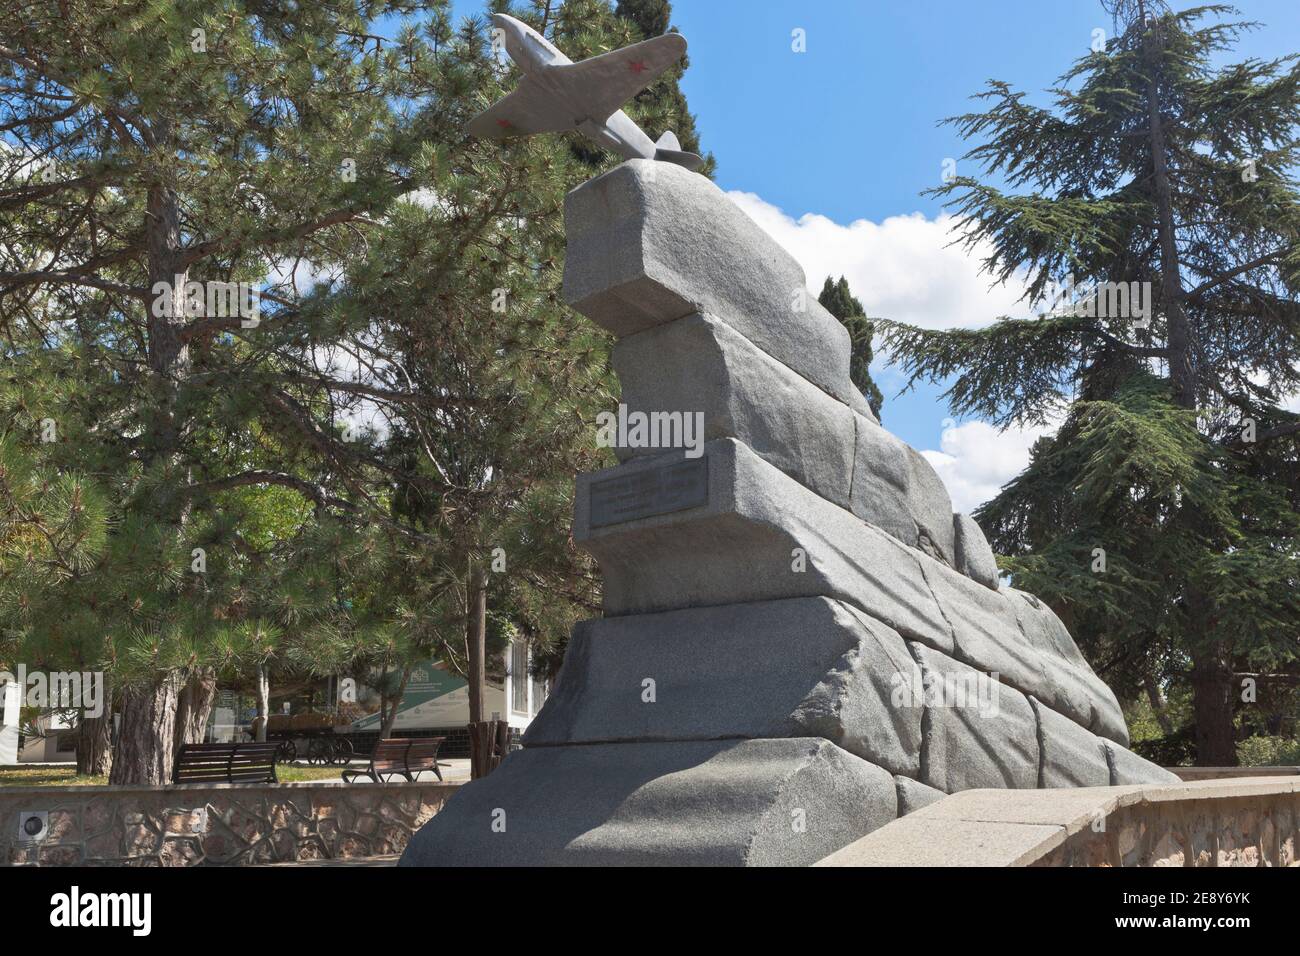 Sevastopol, Crimea, Russia - July 27, 2020: Monument to the pilots of the 8th Air Army in the memorial complex Malakhov Kurgan in the hero city of Sev Stock Photo